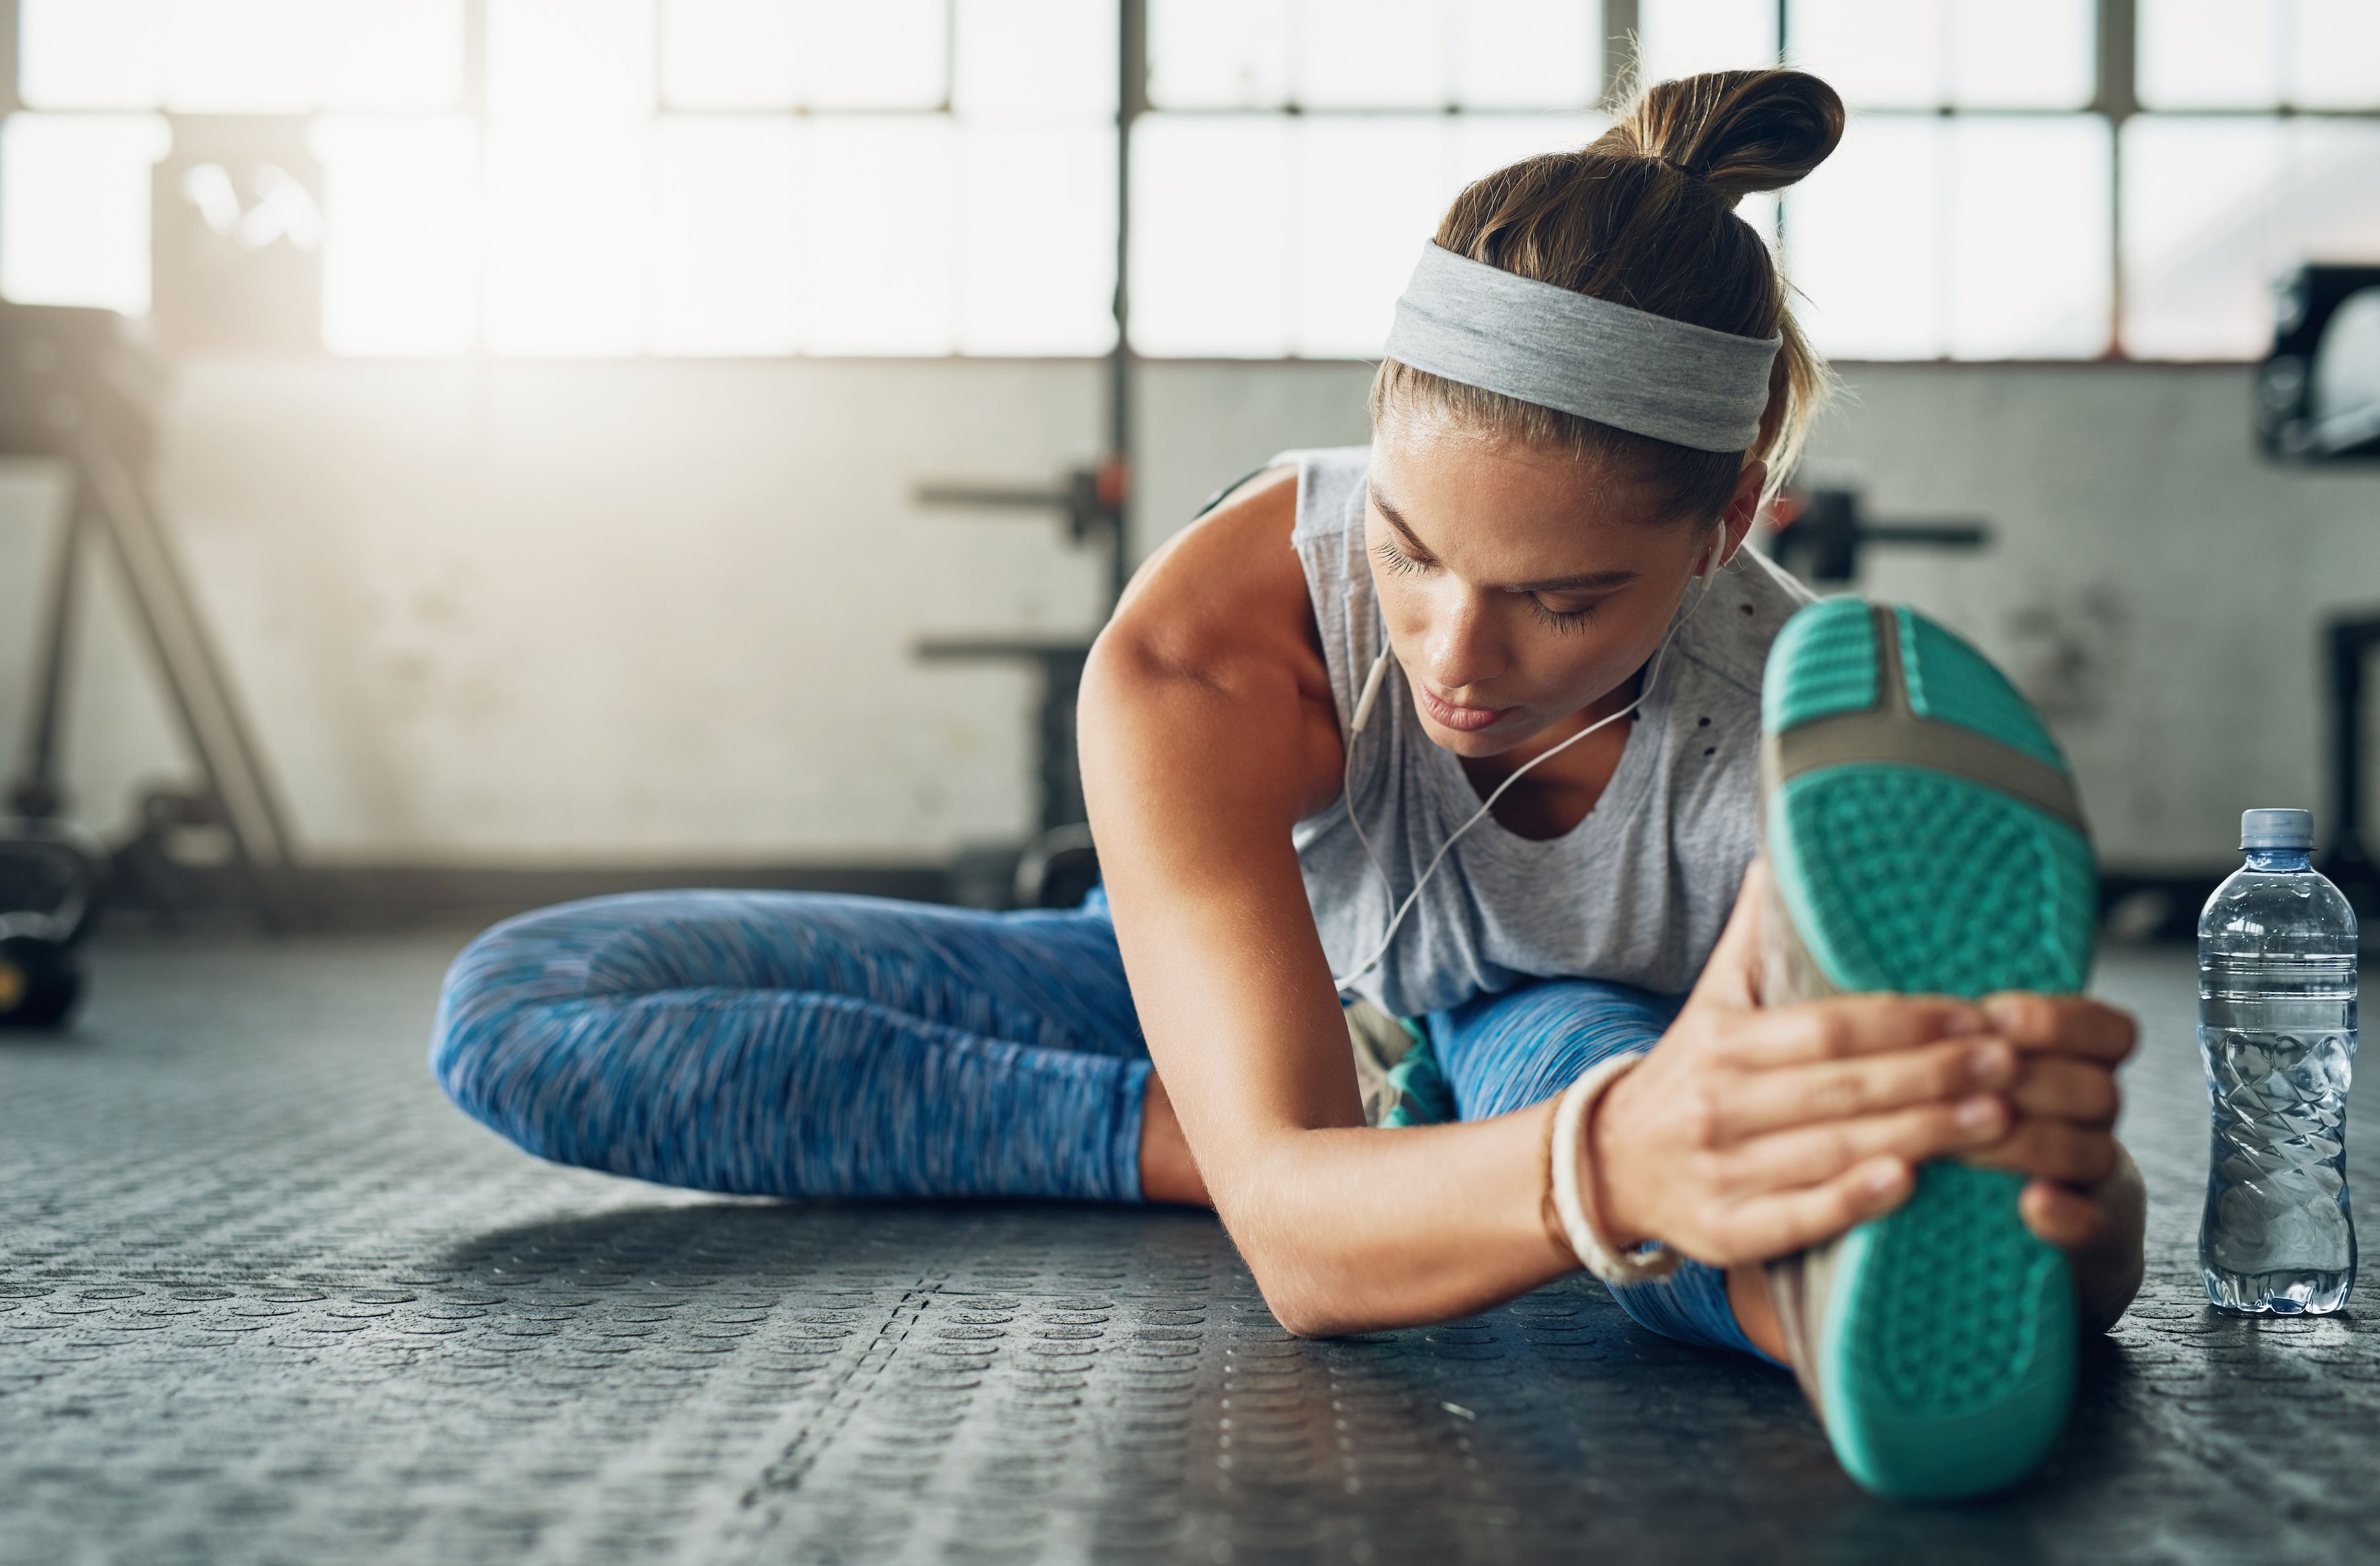 19 Signs Your Fitness Routine Is 'Working' That Have Nothing to Do With  Weight Loss